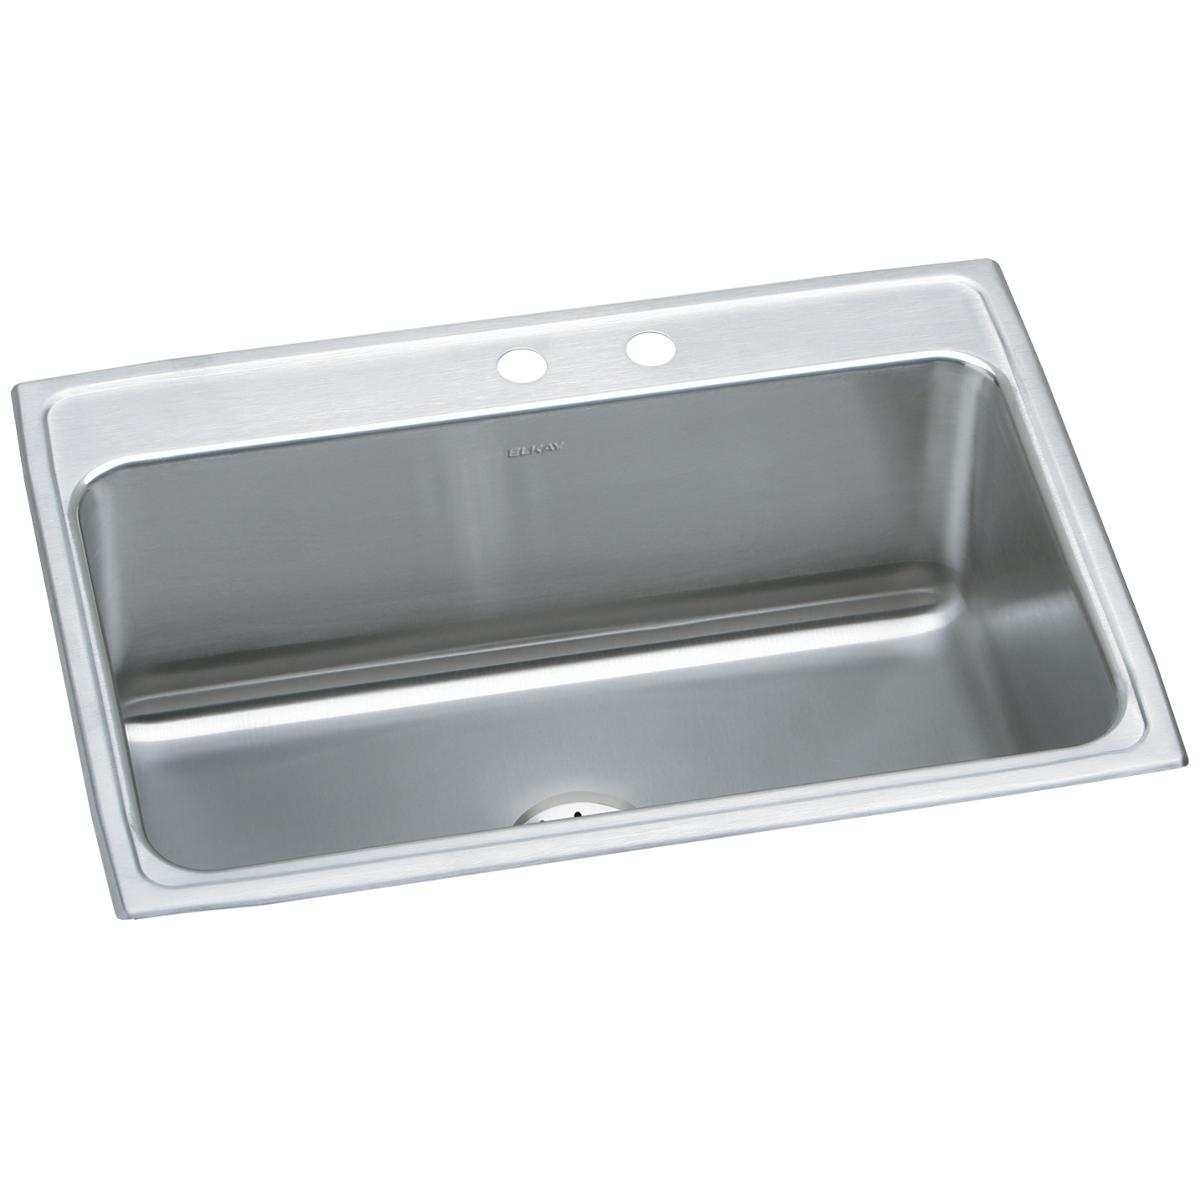 Elkay Lustertone Classic 31" x 22" x 10-1/8" MR2-Hole Single Bowl Drop-in Sink with Perfect Drain